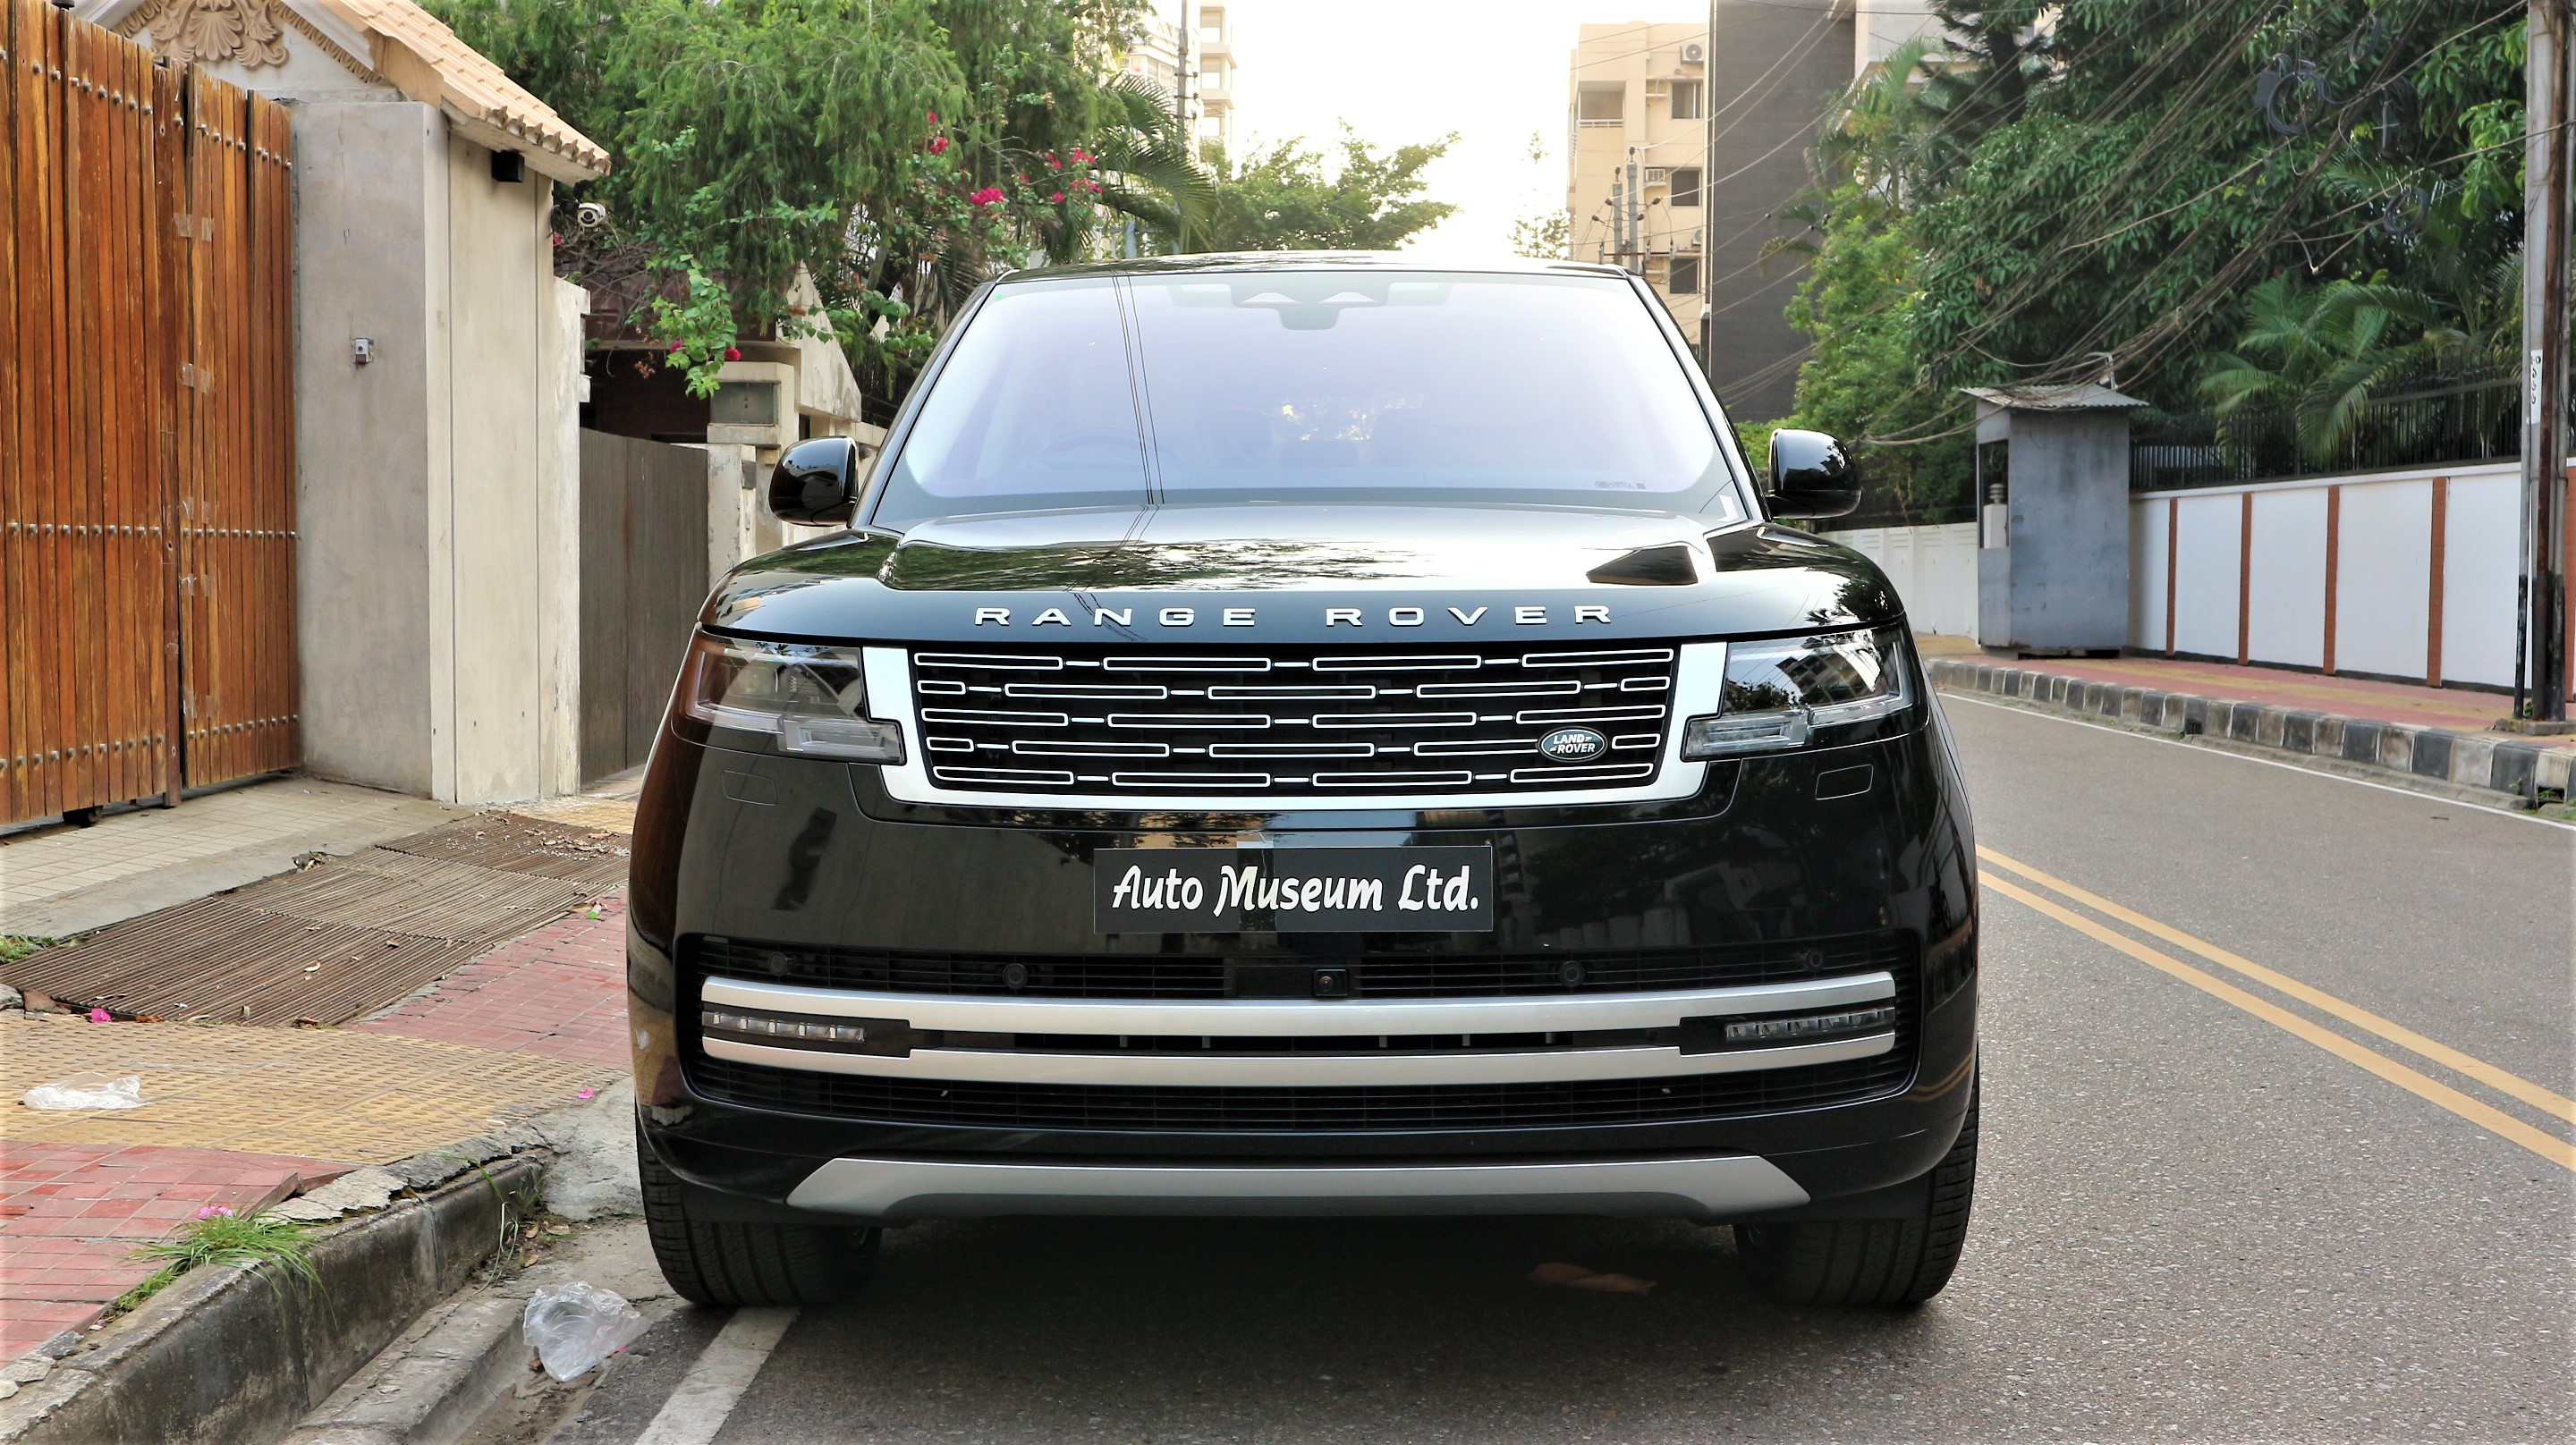 RANGE ROVER AUTOBIOGRAPHY, The Model Year 2023.